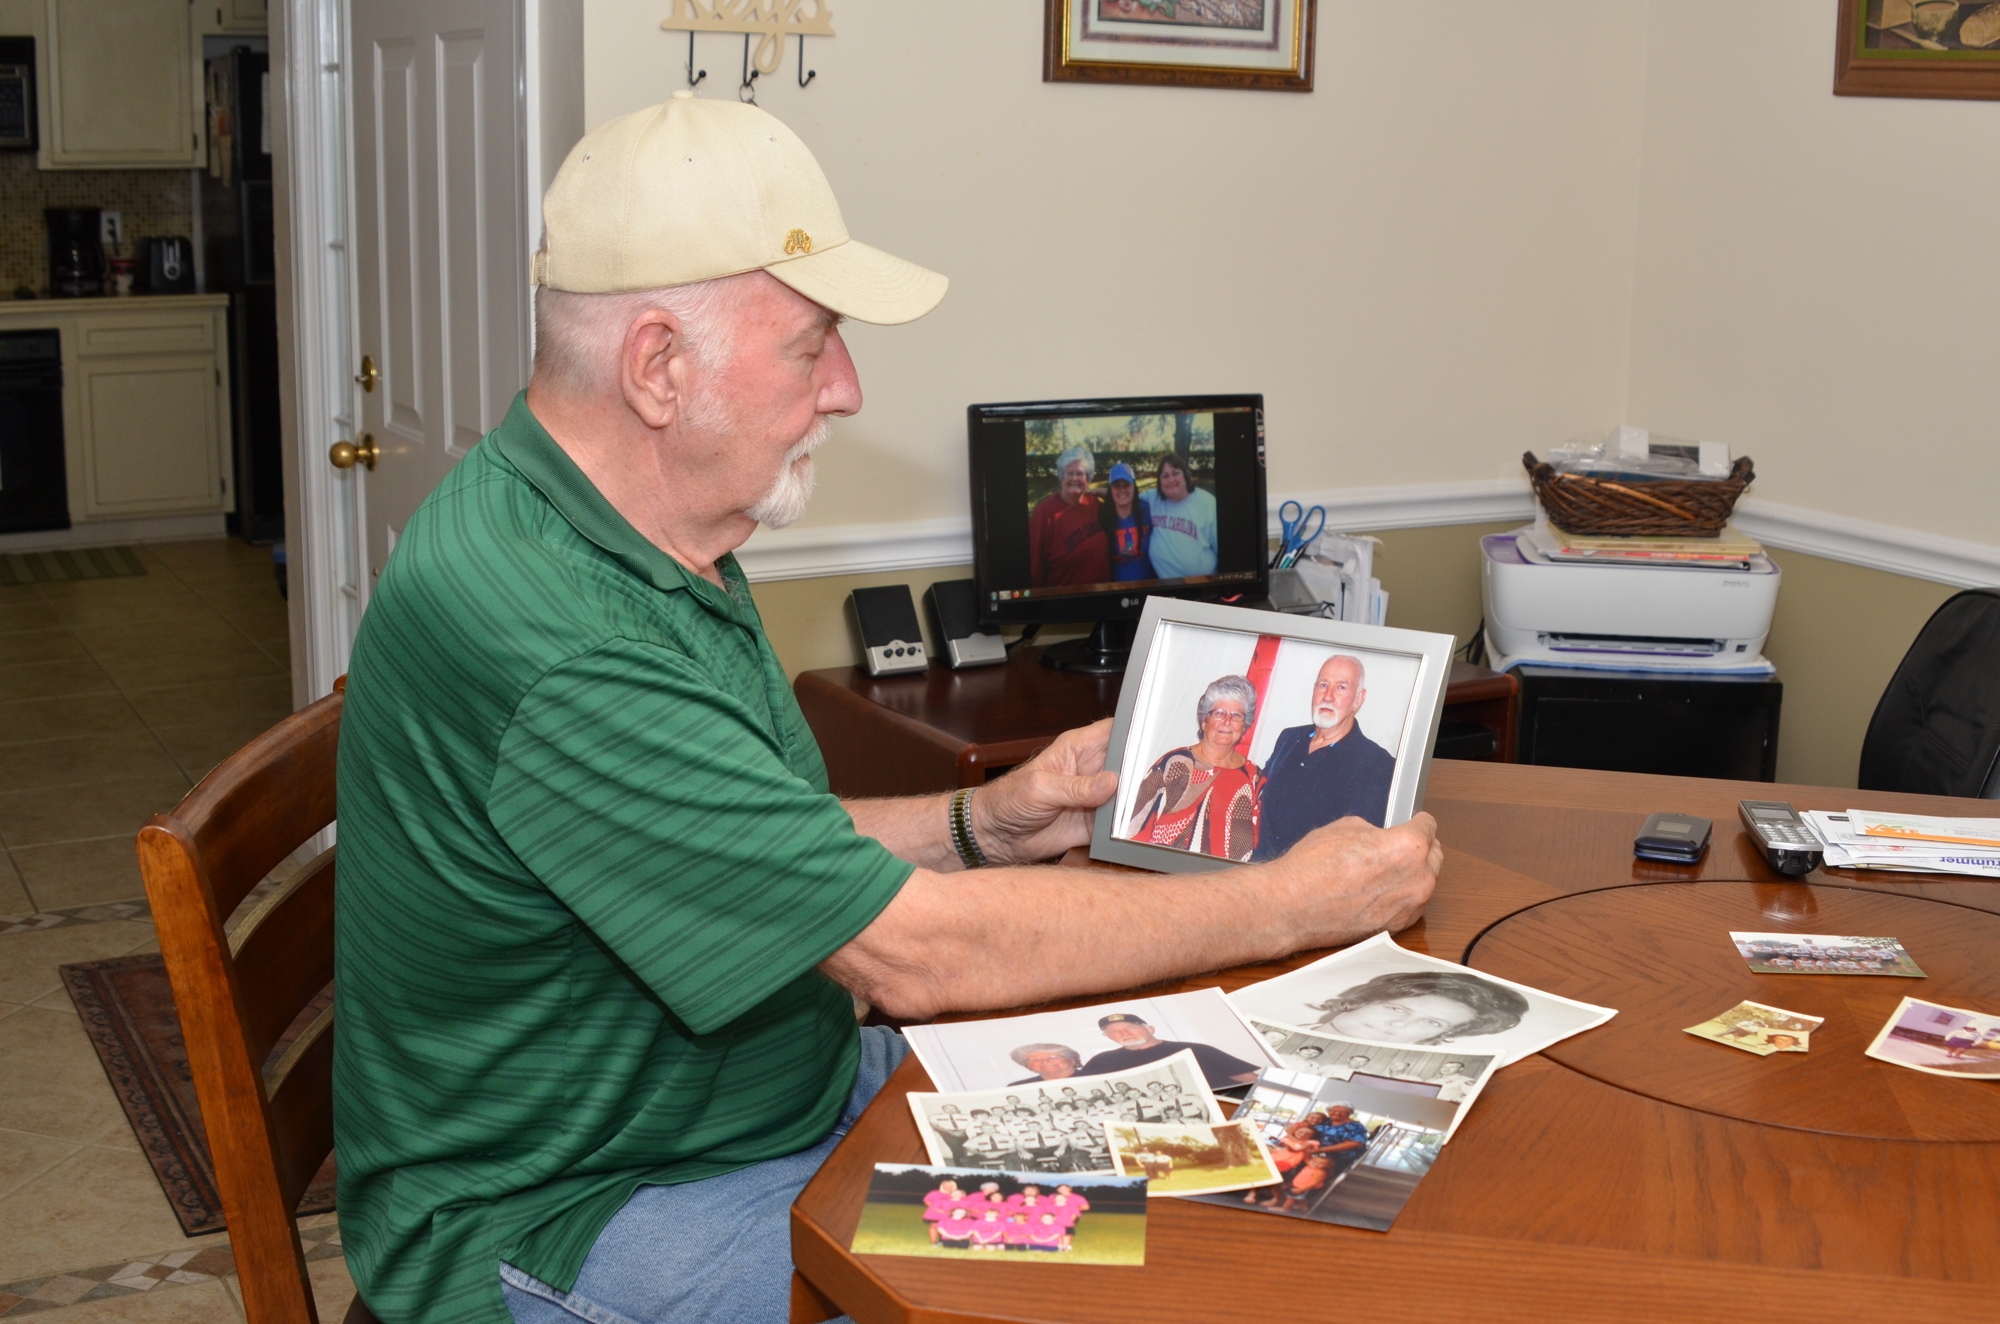 Ed Decker looks over photographs of his wife, Merle, who died Aug. 1.